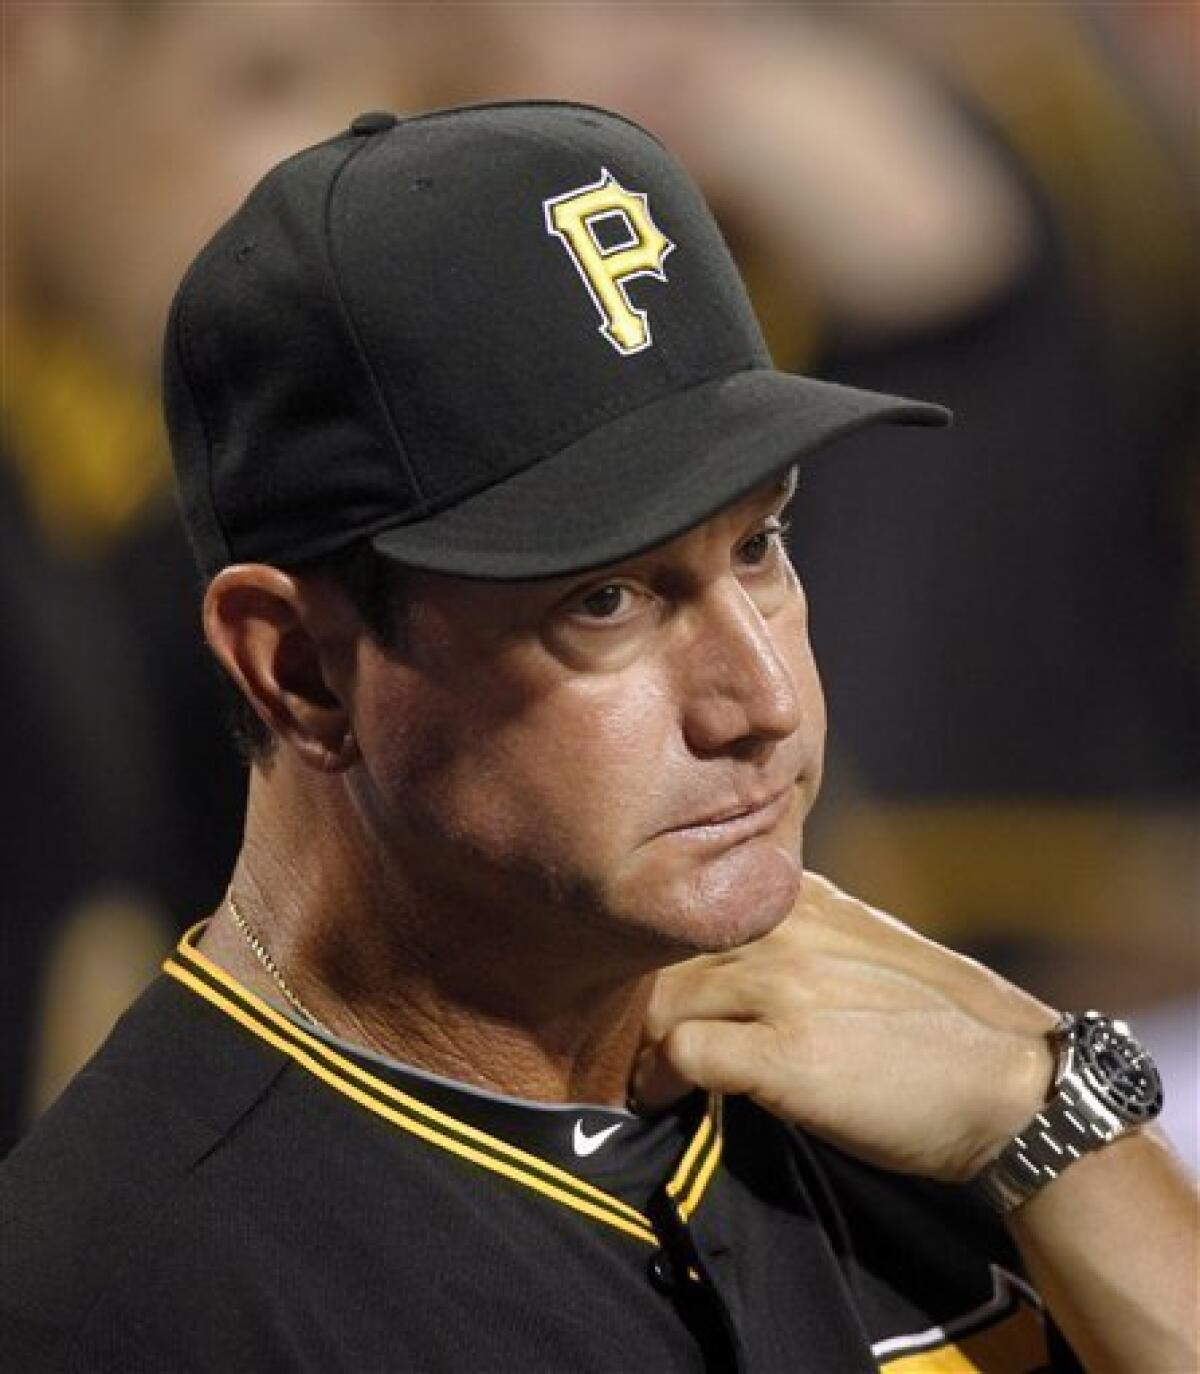 The demise of the Pirates is bad for baseball